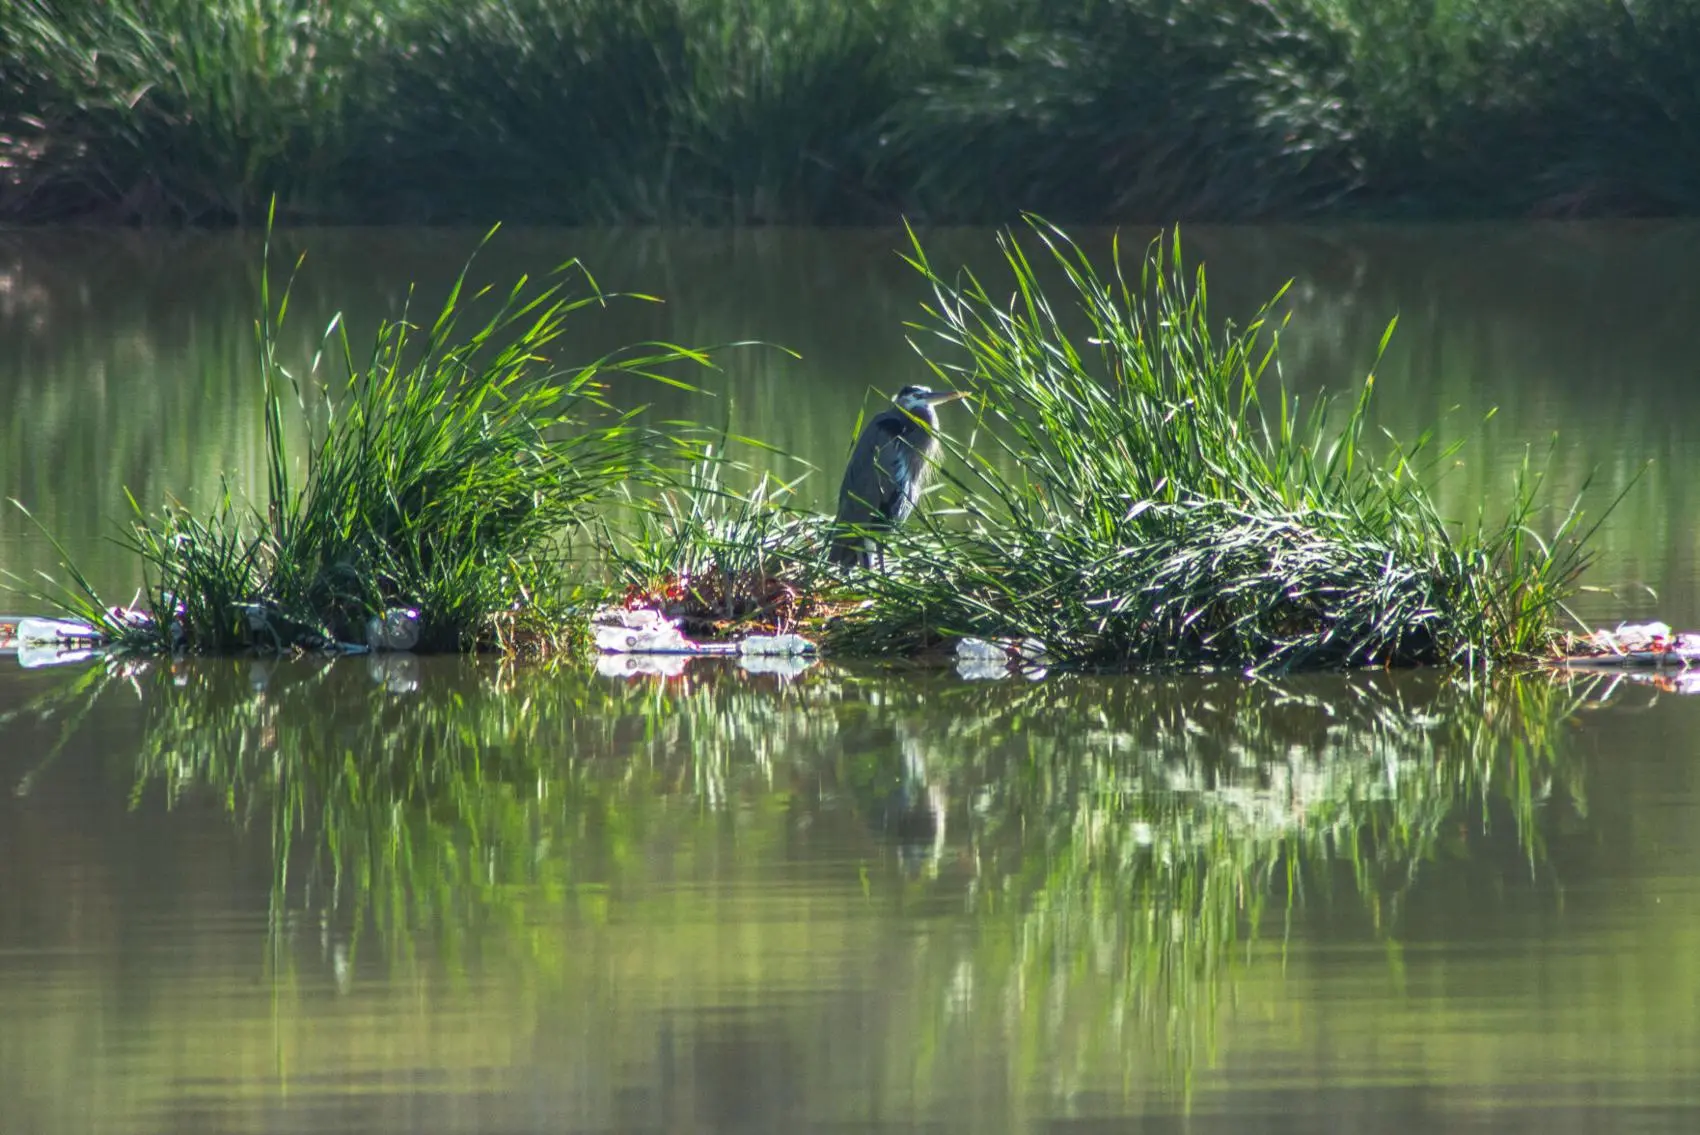 A bird sits in waste water